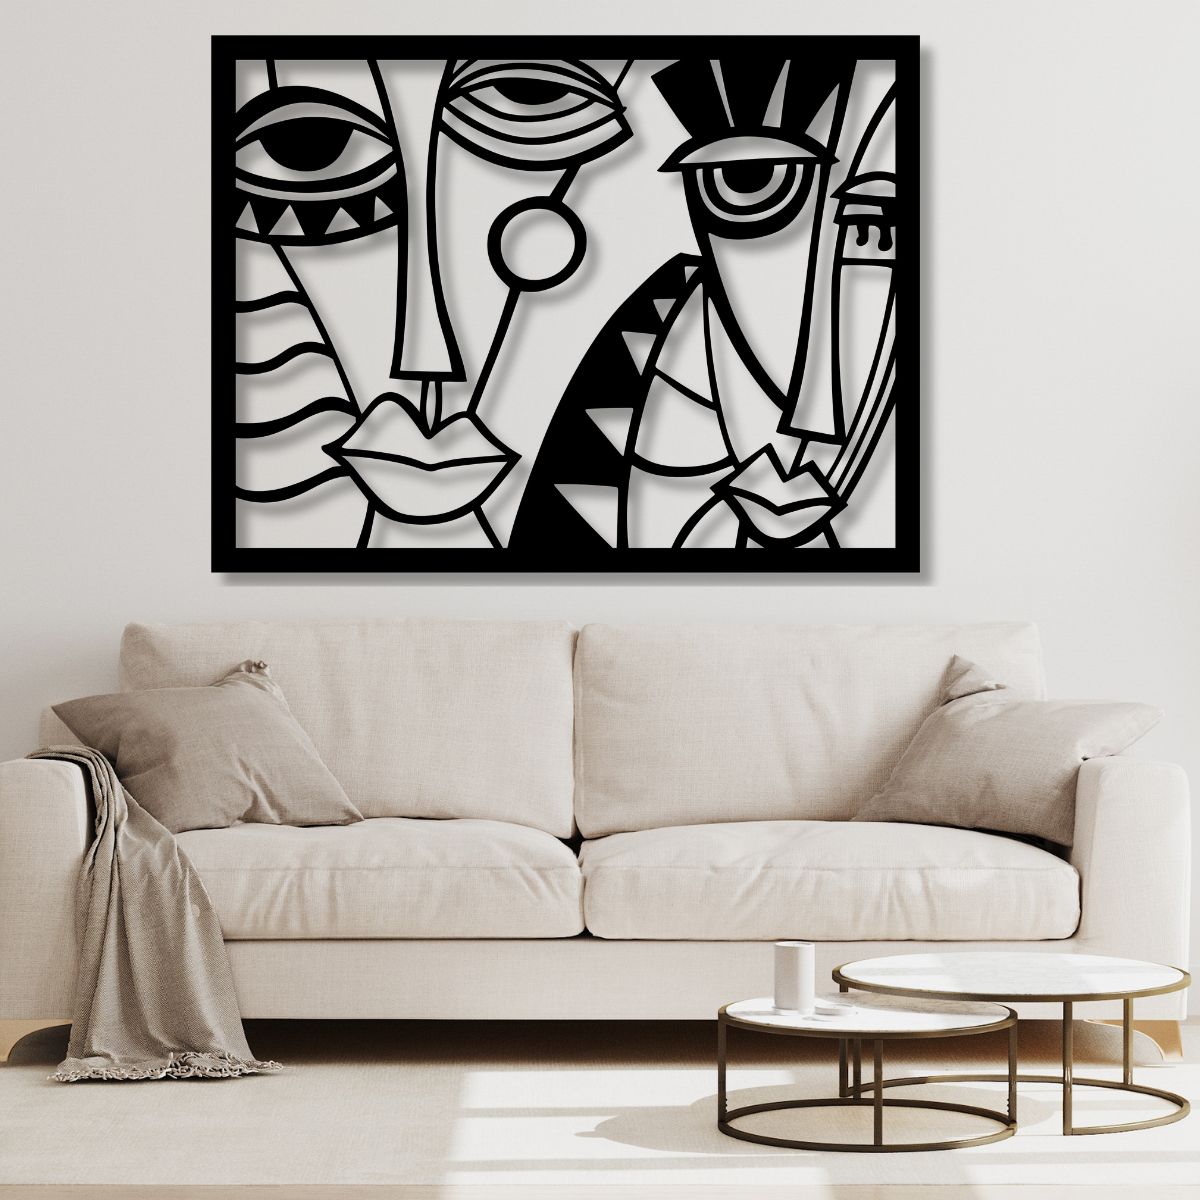 Picasso Metal Wall Art Guernica Wall Decor Modern Art for Home or Office Housewarming Gift for Art Lover Large Indoor Outdoor Metal Wall Decor